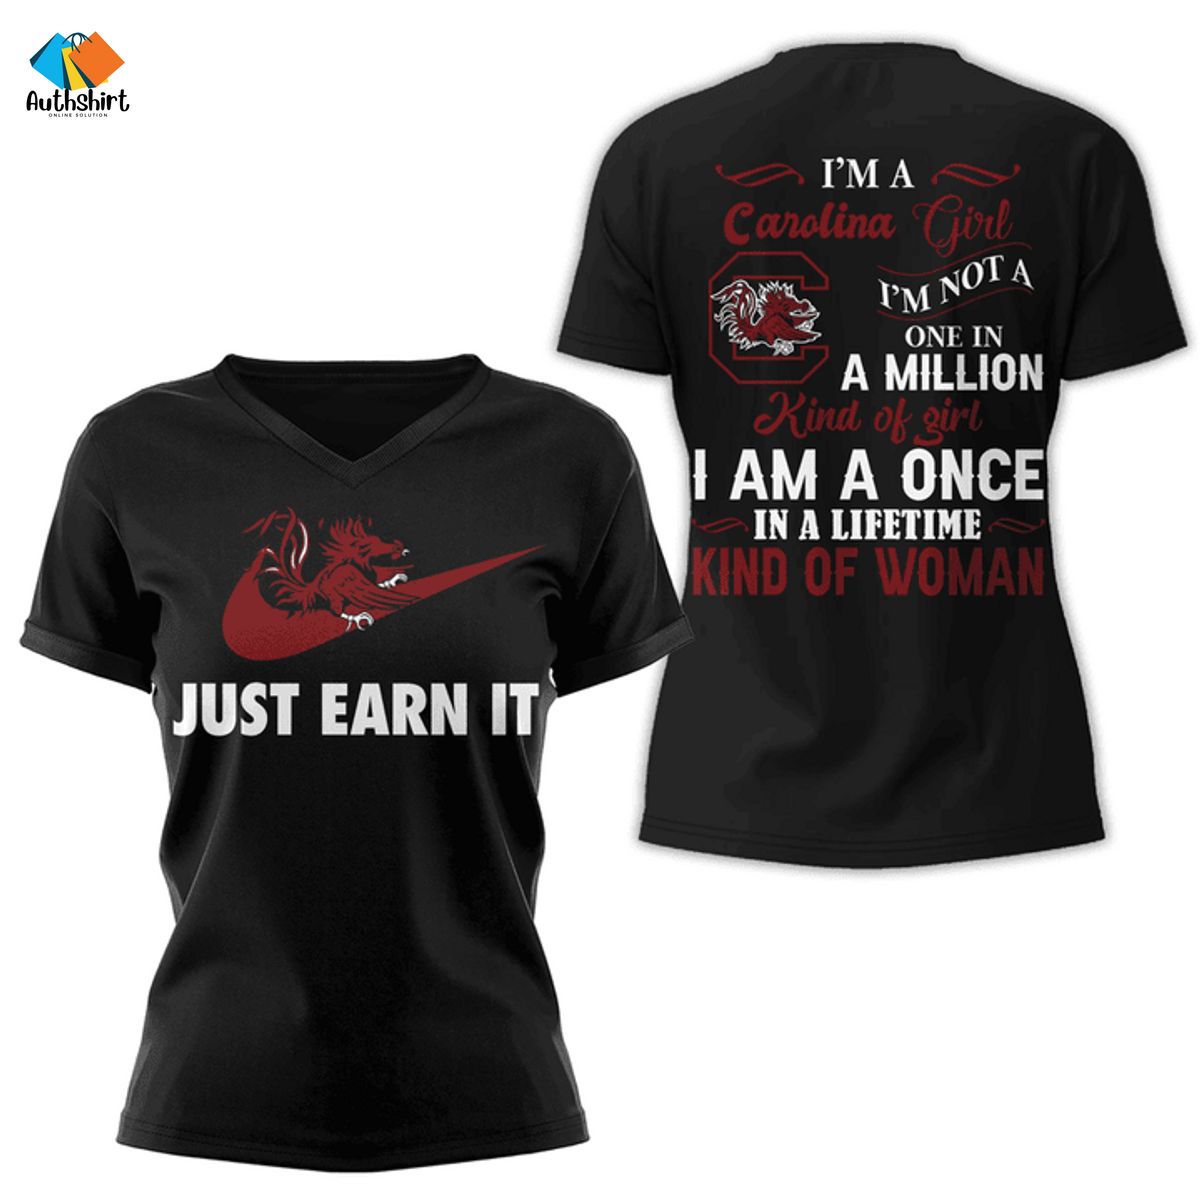 South Carolina Gamecocks Girl In A Lifetime Kind Of Woman Just Earn It Nike Tshirt